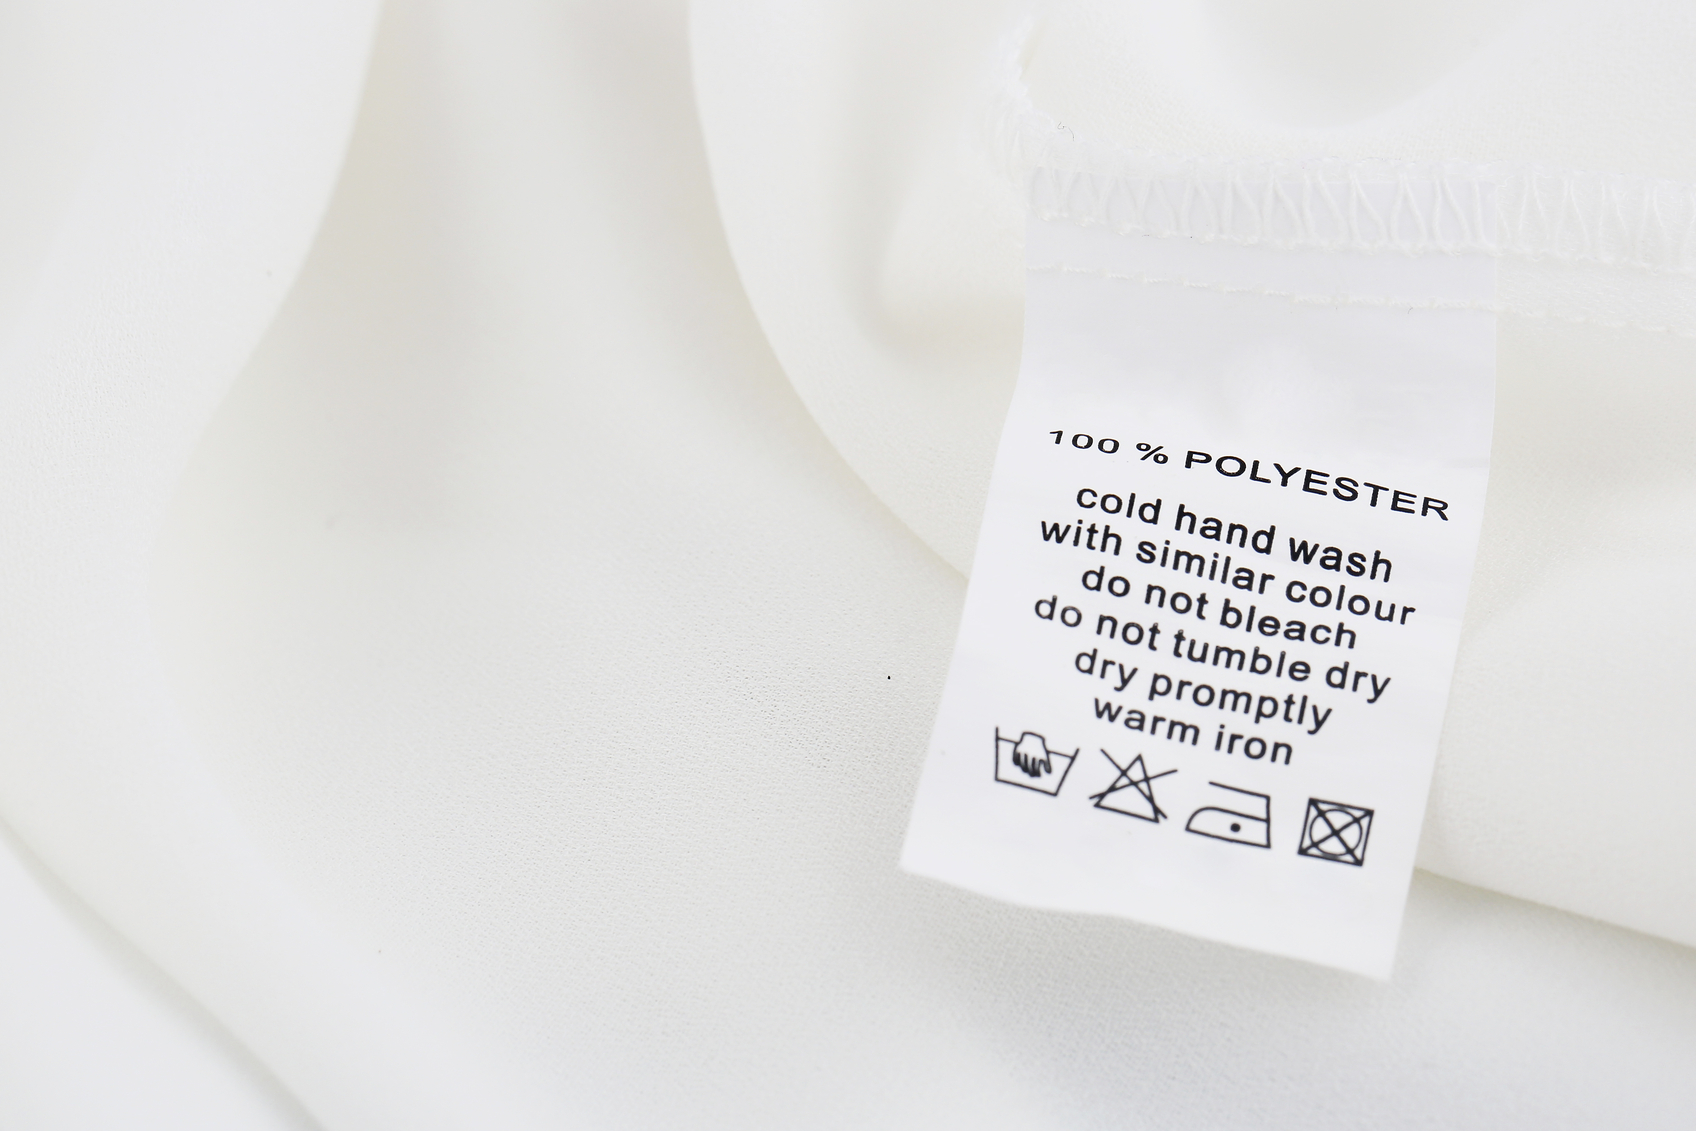 https://www.lifeopedia.com/wp-content/uploads/2016/07/Fabric-composition-and-washing-instructions-label-on-white-shirt.jpg